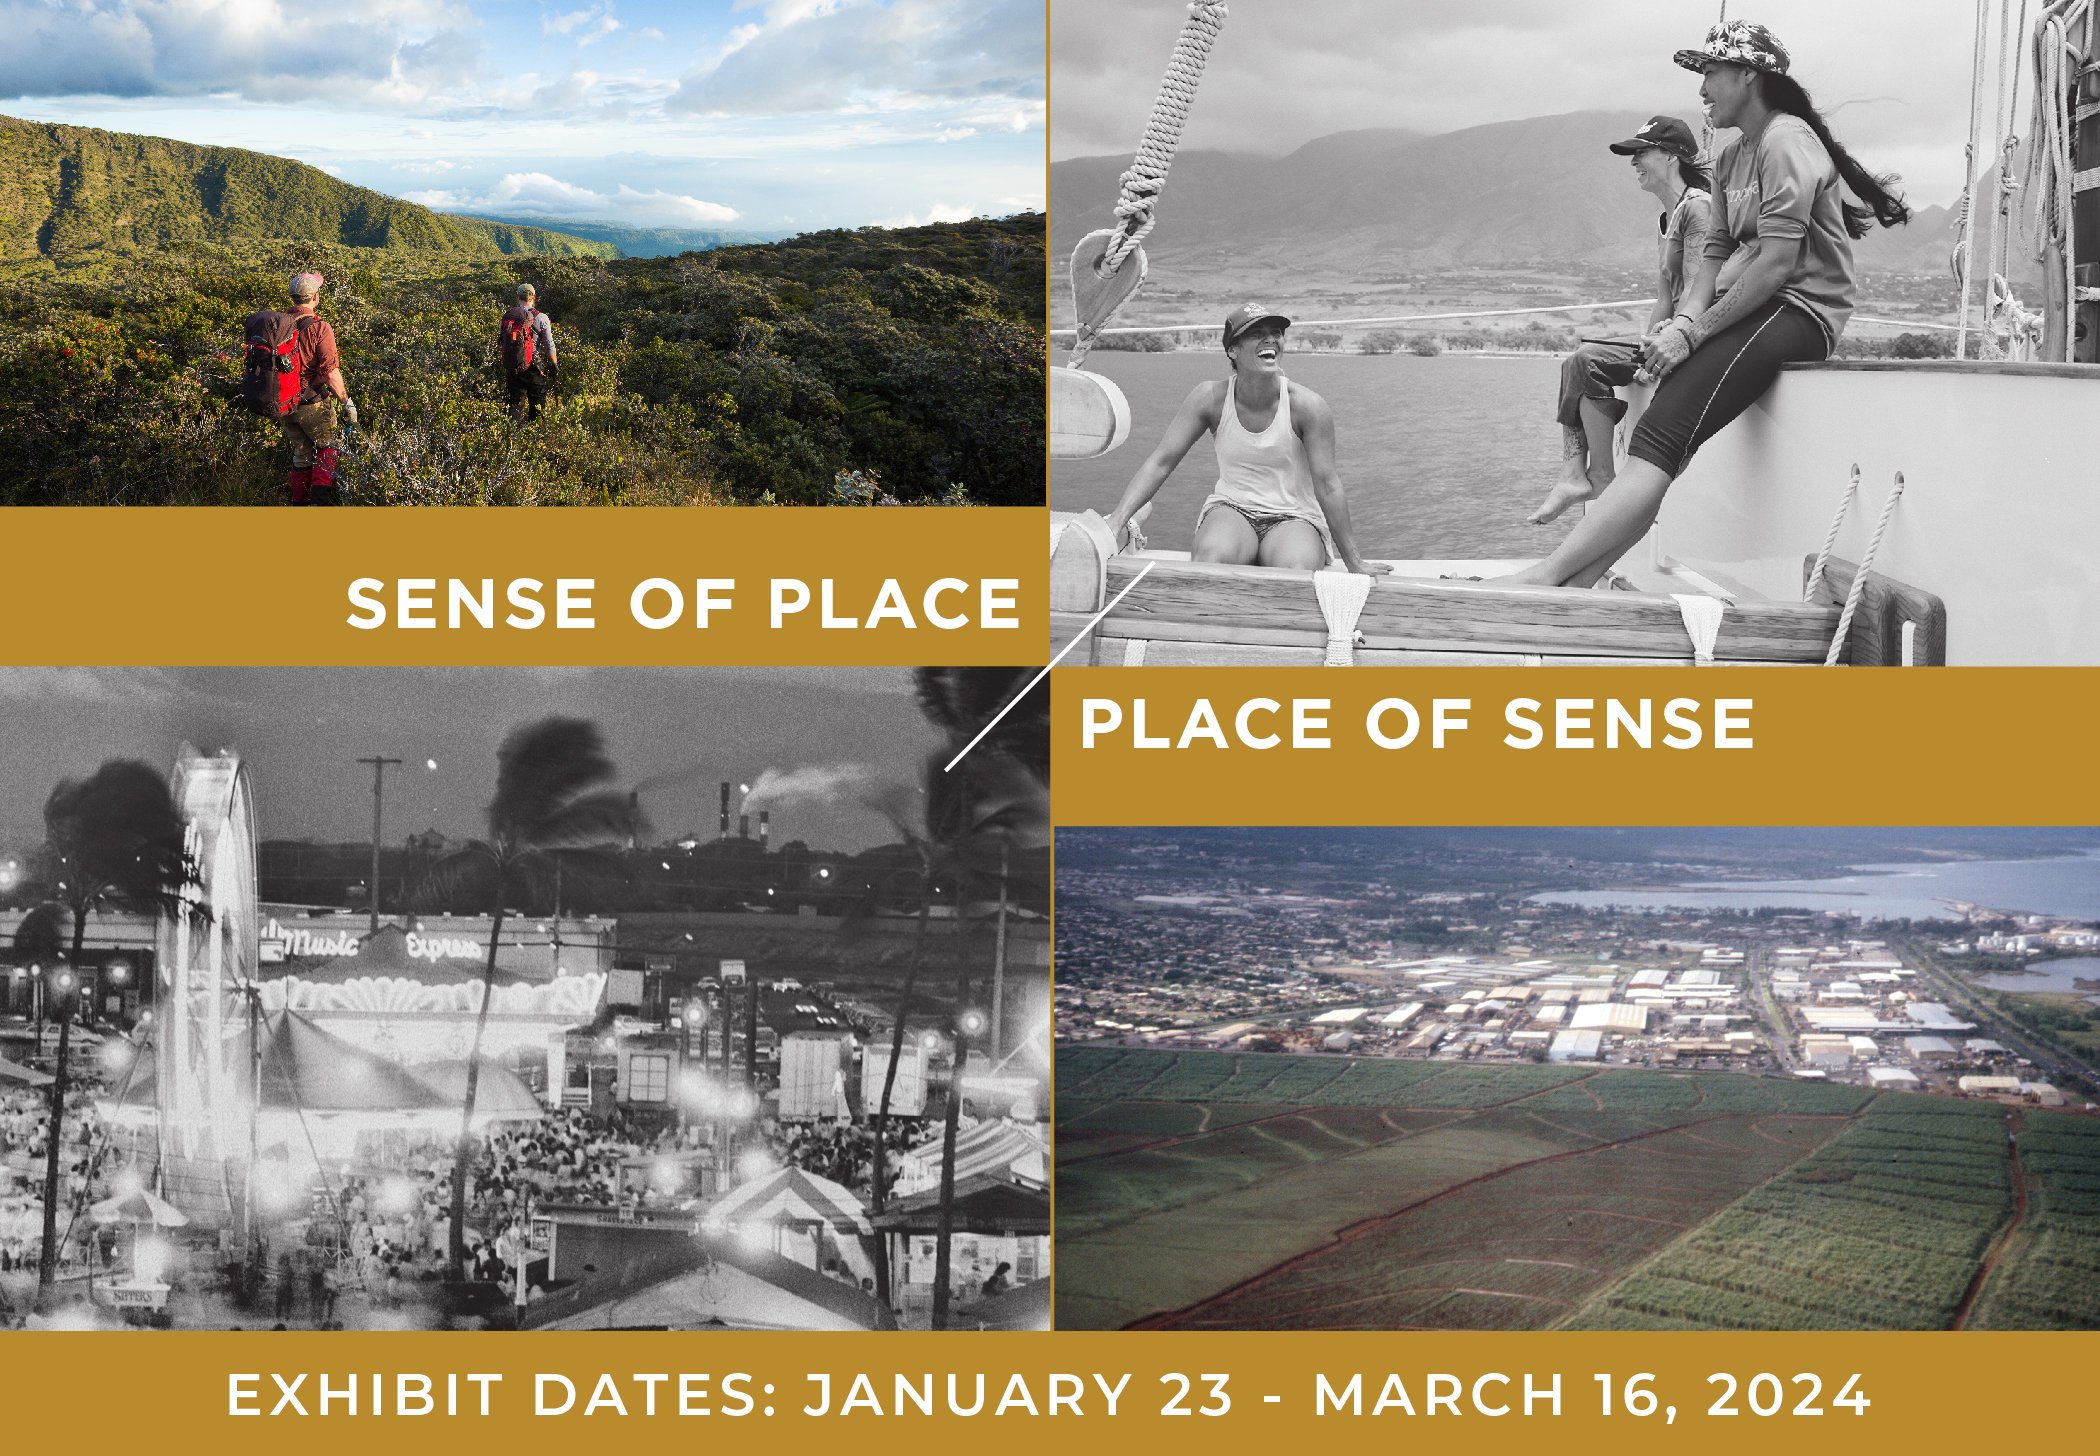     Sense of Place / Place of Sense   Jan 23 - Mar 16, 2024  Schaefer International Gallery, Maui Arts &amp; Cultural Center   This exhibition explores the multi-faceted meaning of community at a critical moment of change for Maui, looking at who we 